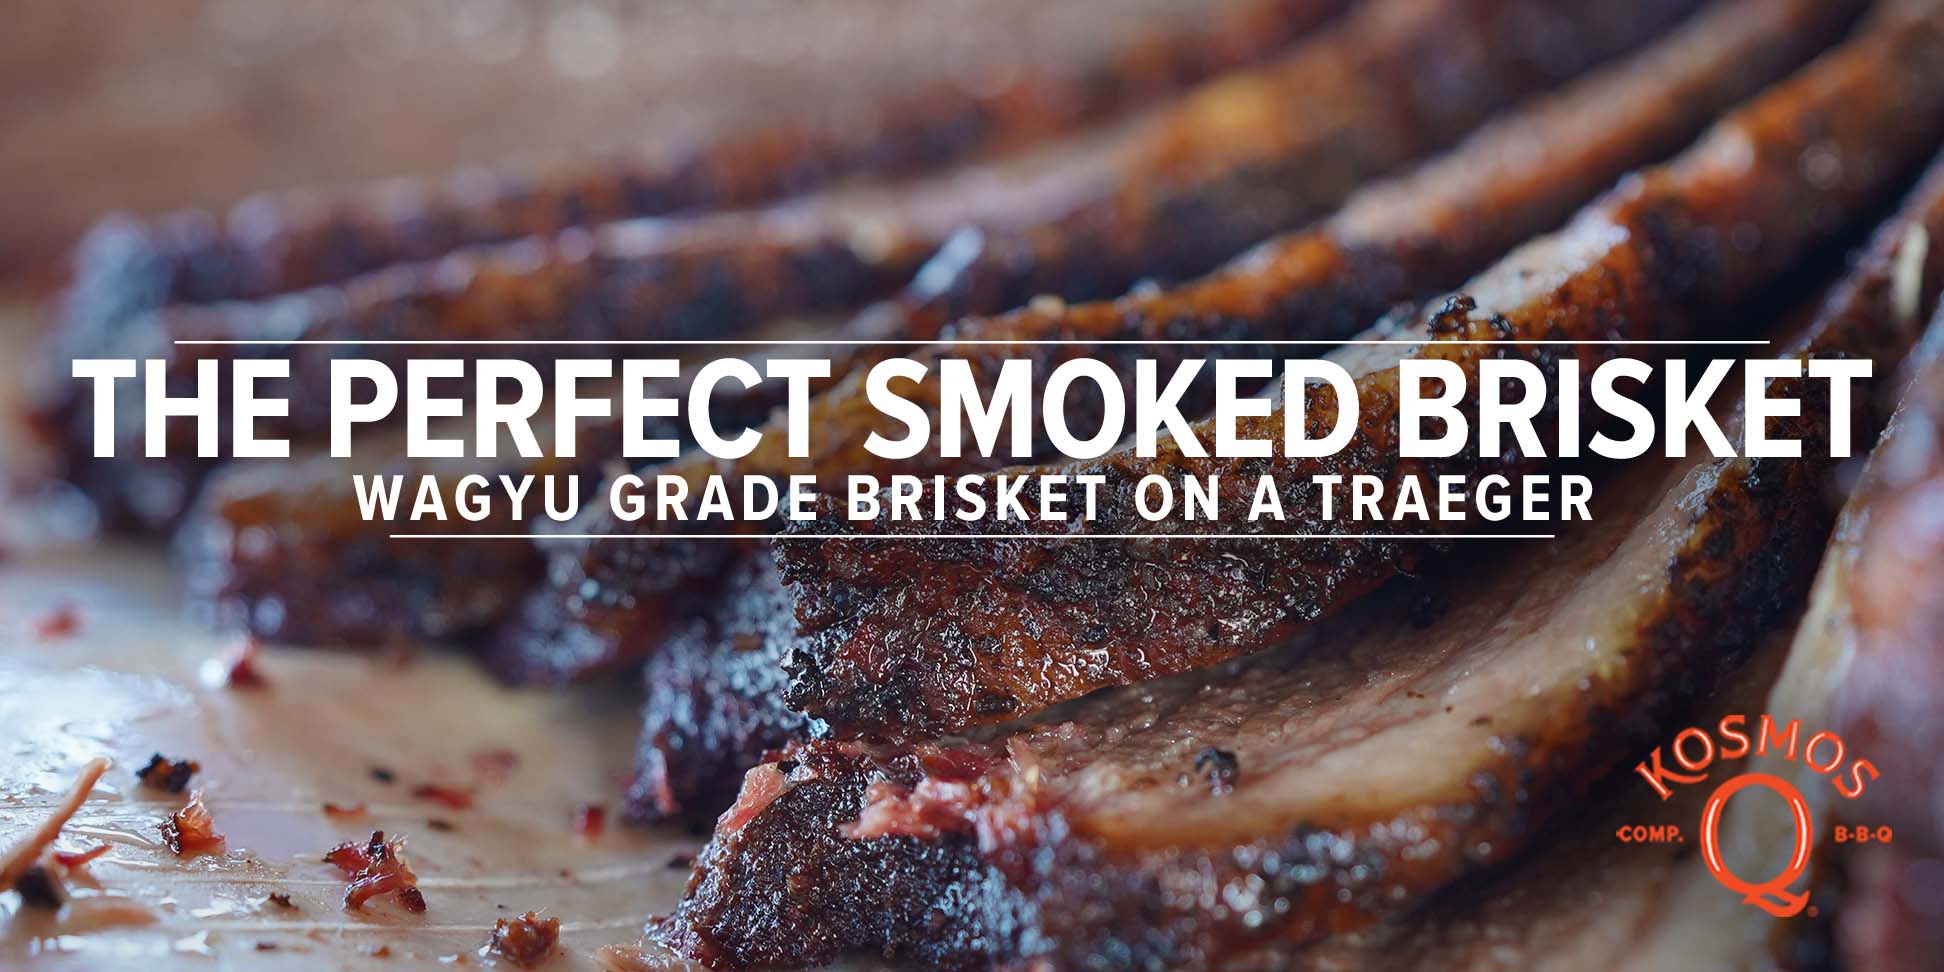 The Perfect Smoked Brisket (On a Pellet Grill)